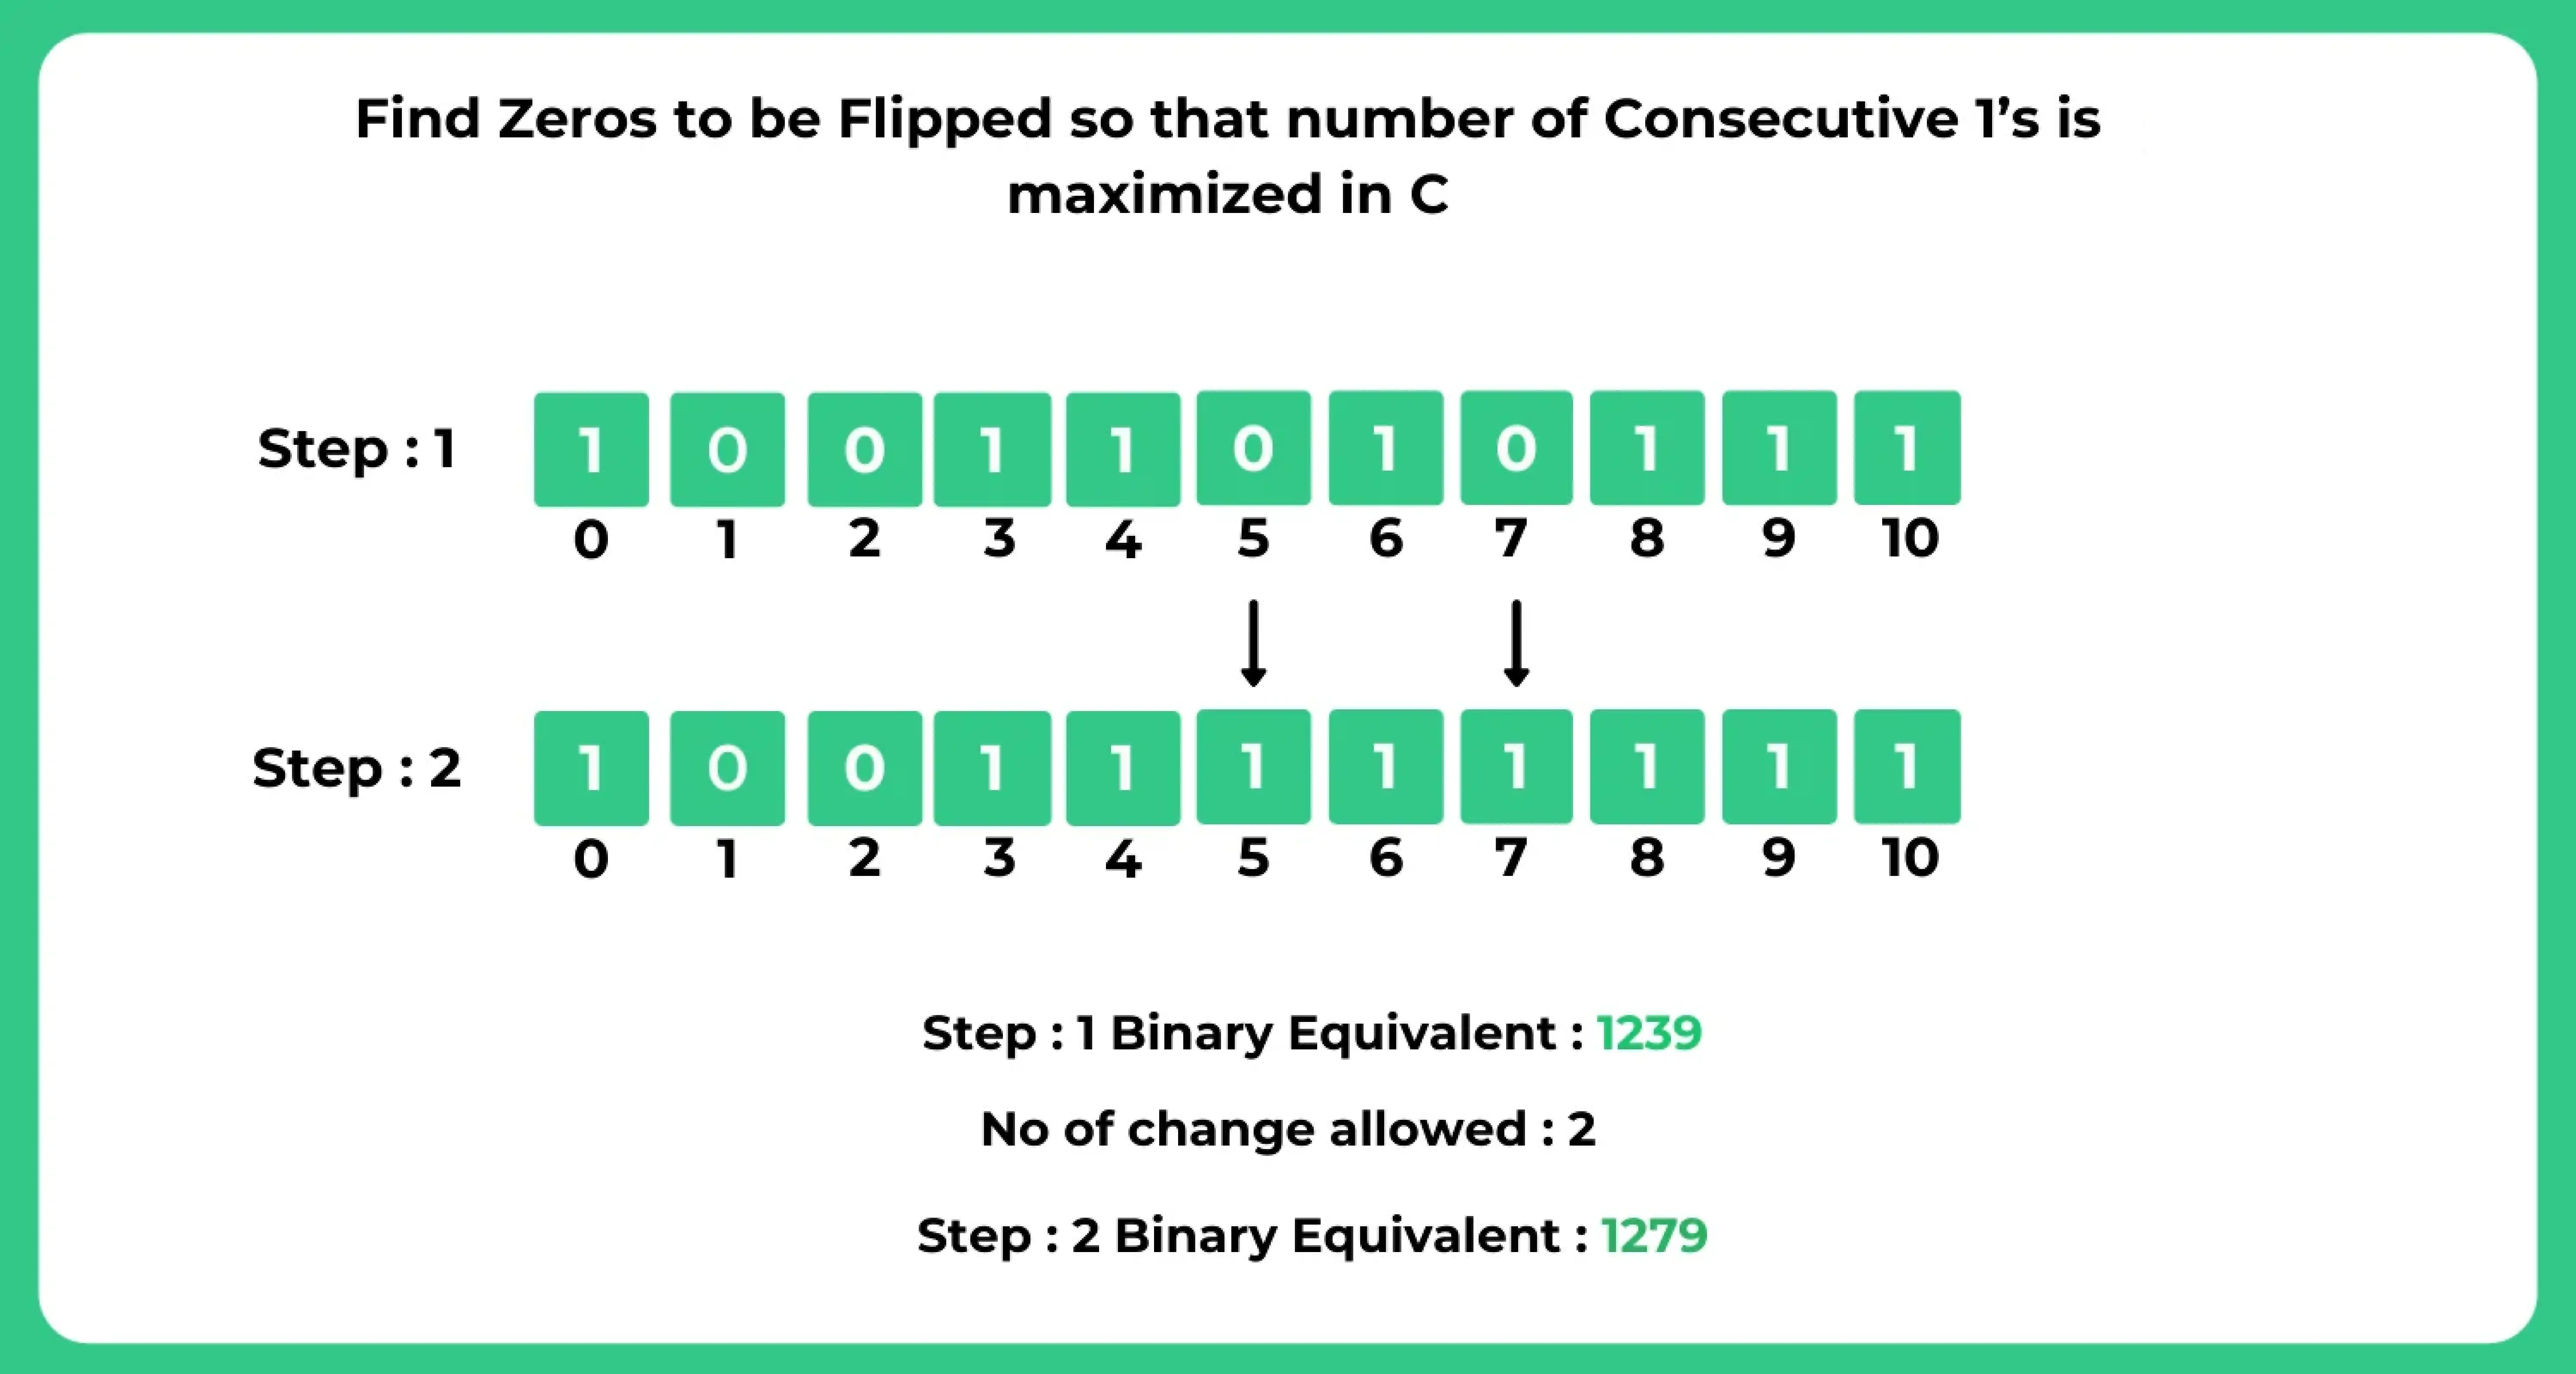 Find Zeros to be Flipped so that number of Consecutive 1’s is maximized in C